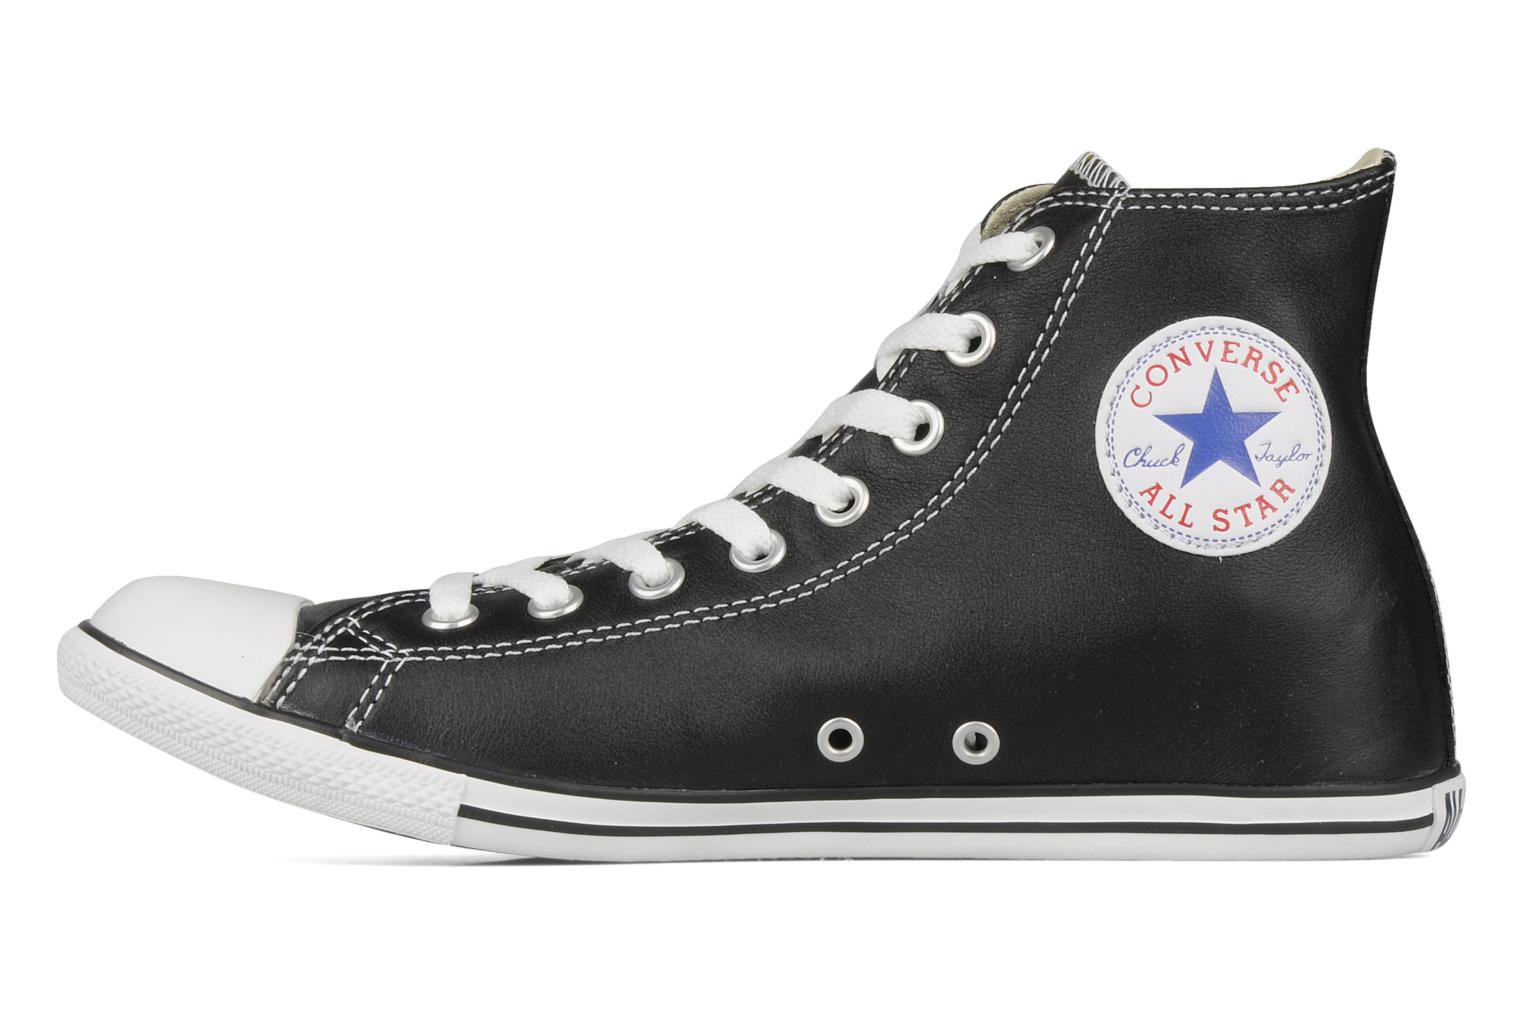 Converse Chuck taylor all star slim leather hi m Trainers in Black at ...